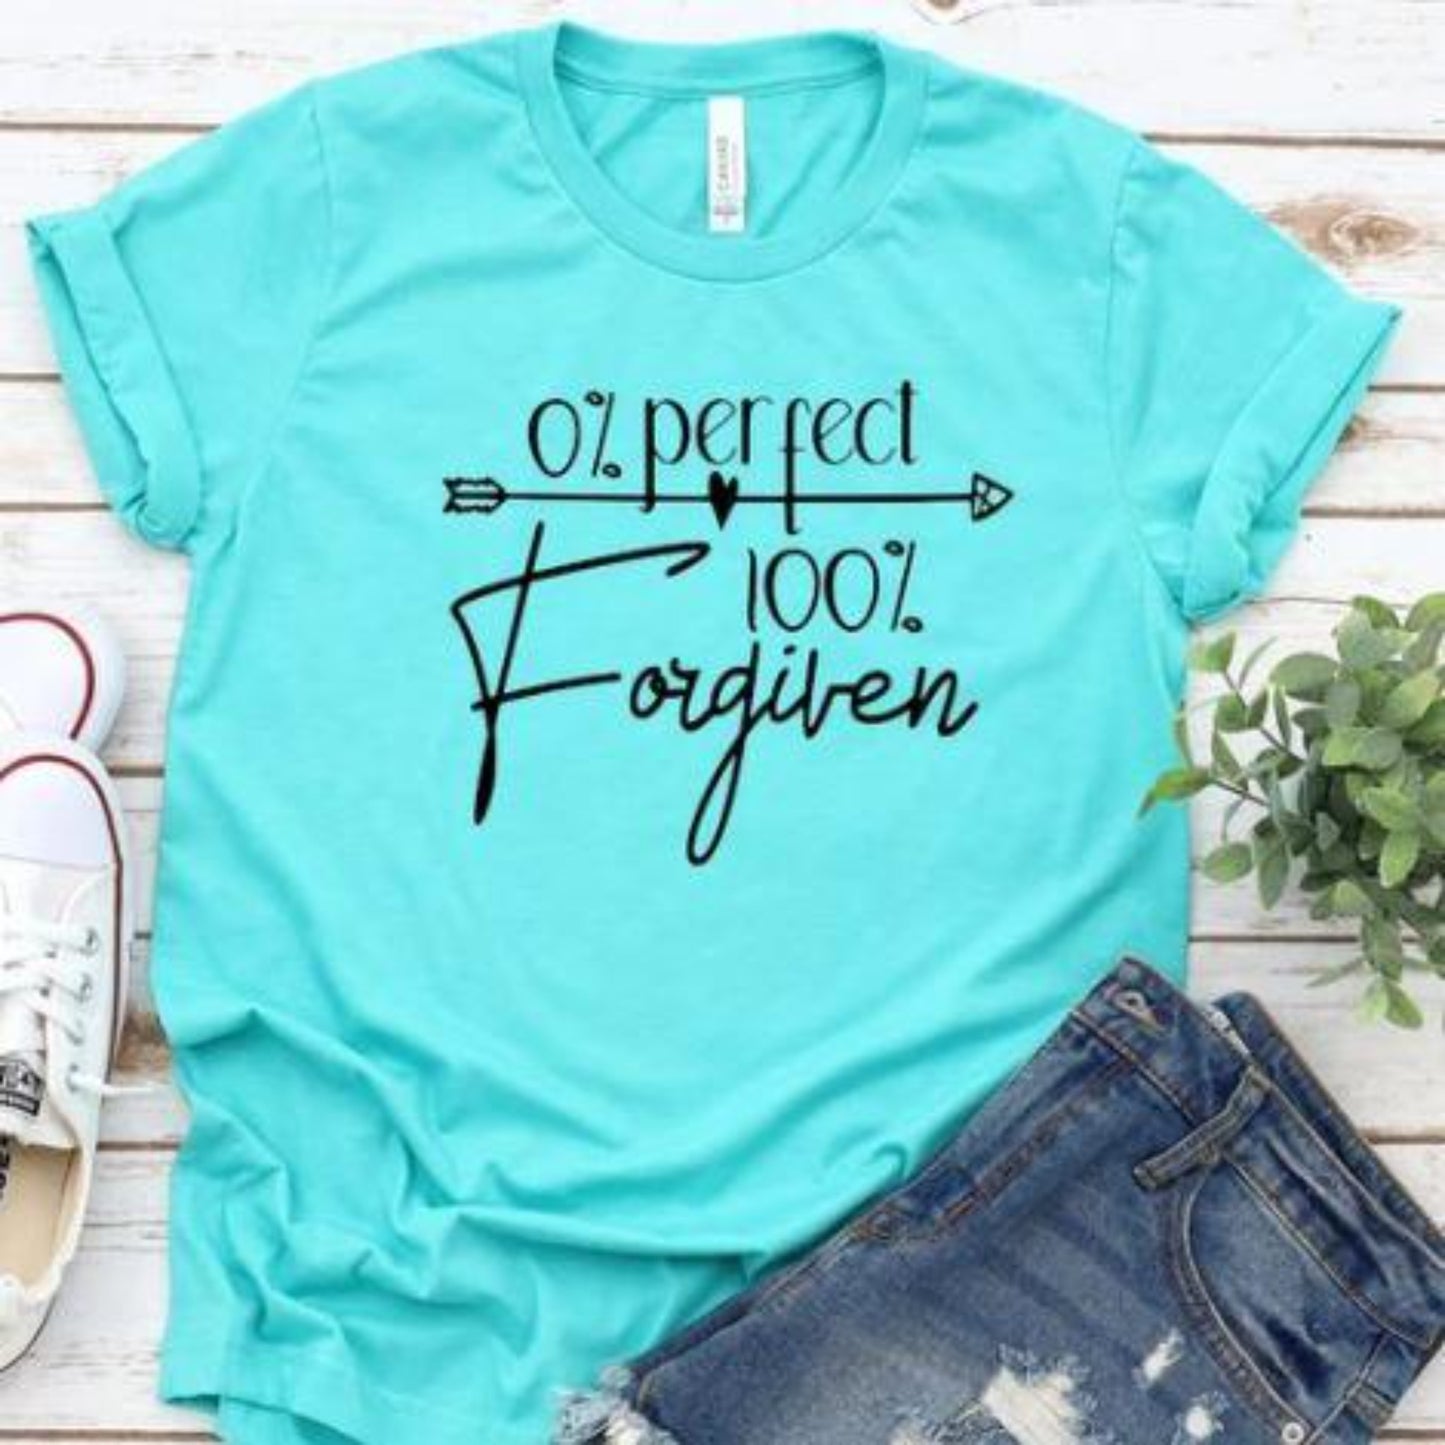 zero_perfect_100_forgiven specialty tee christian wear everday tshirt comfortable wear